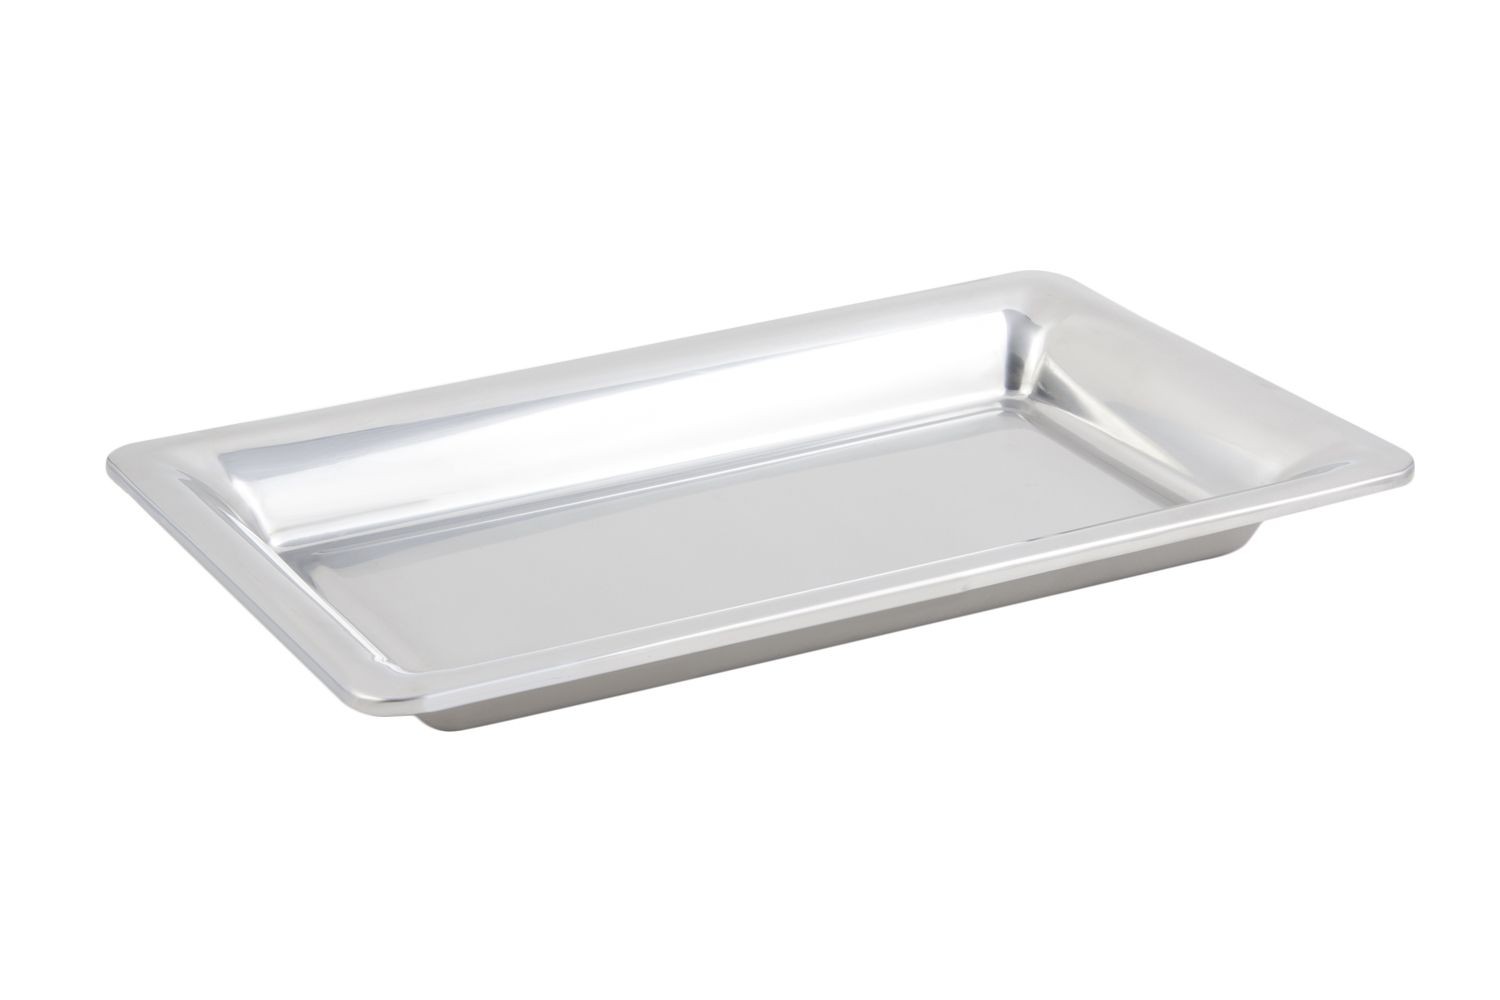 Bon Chef 9323 Cold Wave Platter with Satin Finish, 21 1/8" x 12 3/4" x 2 1/8", Set of 6